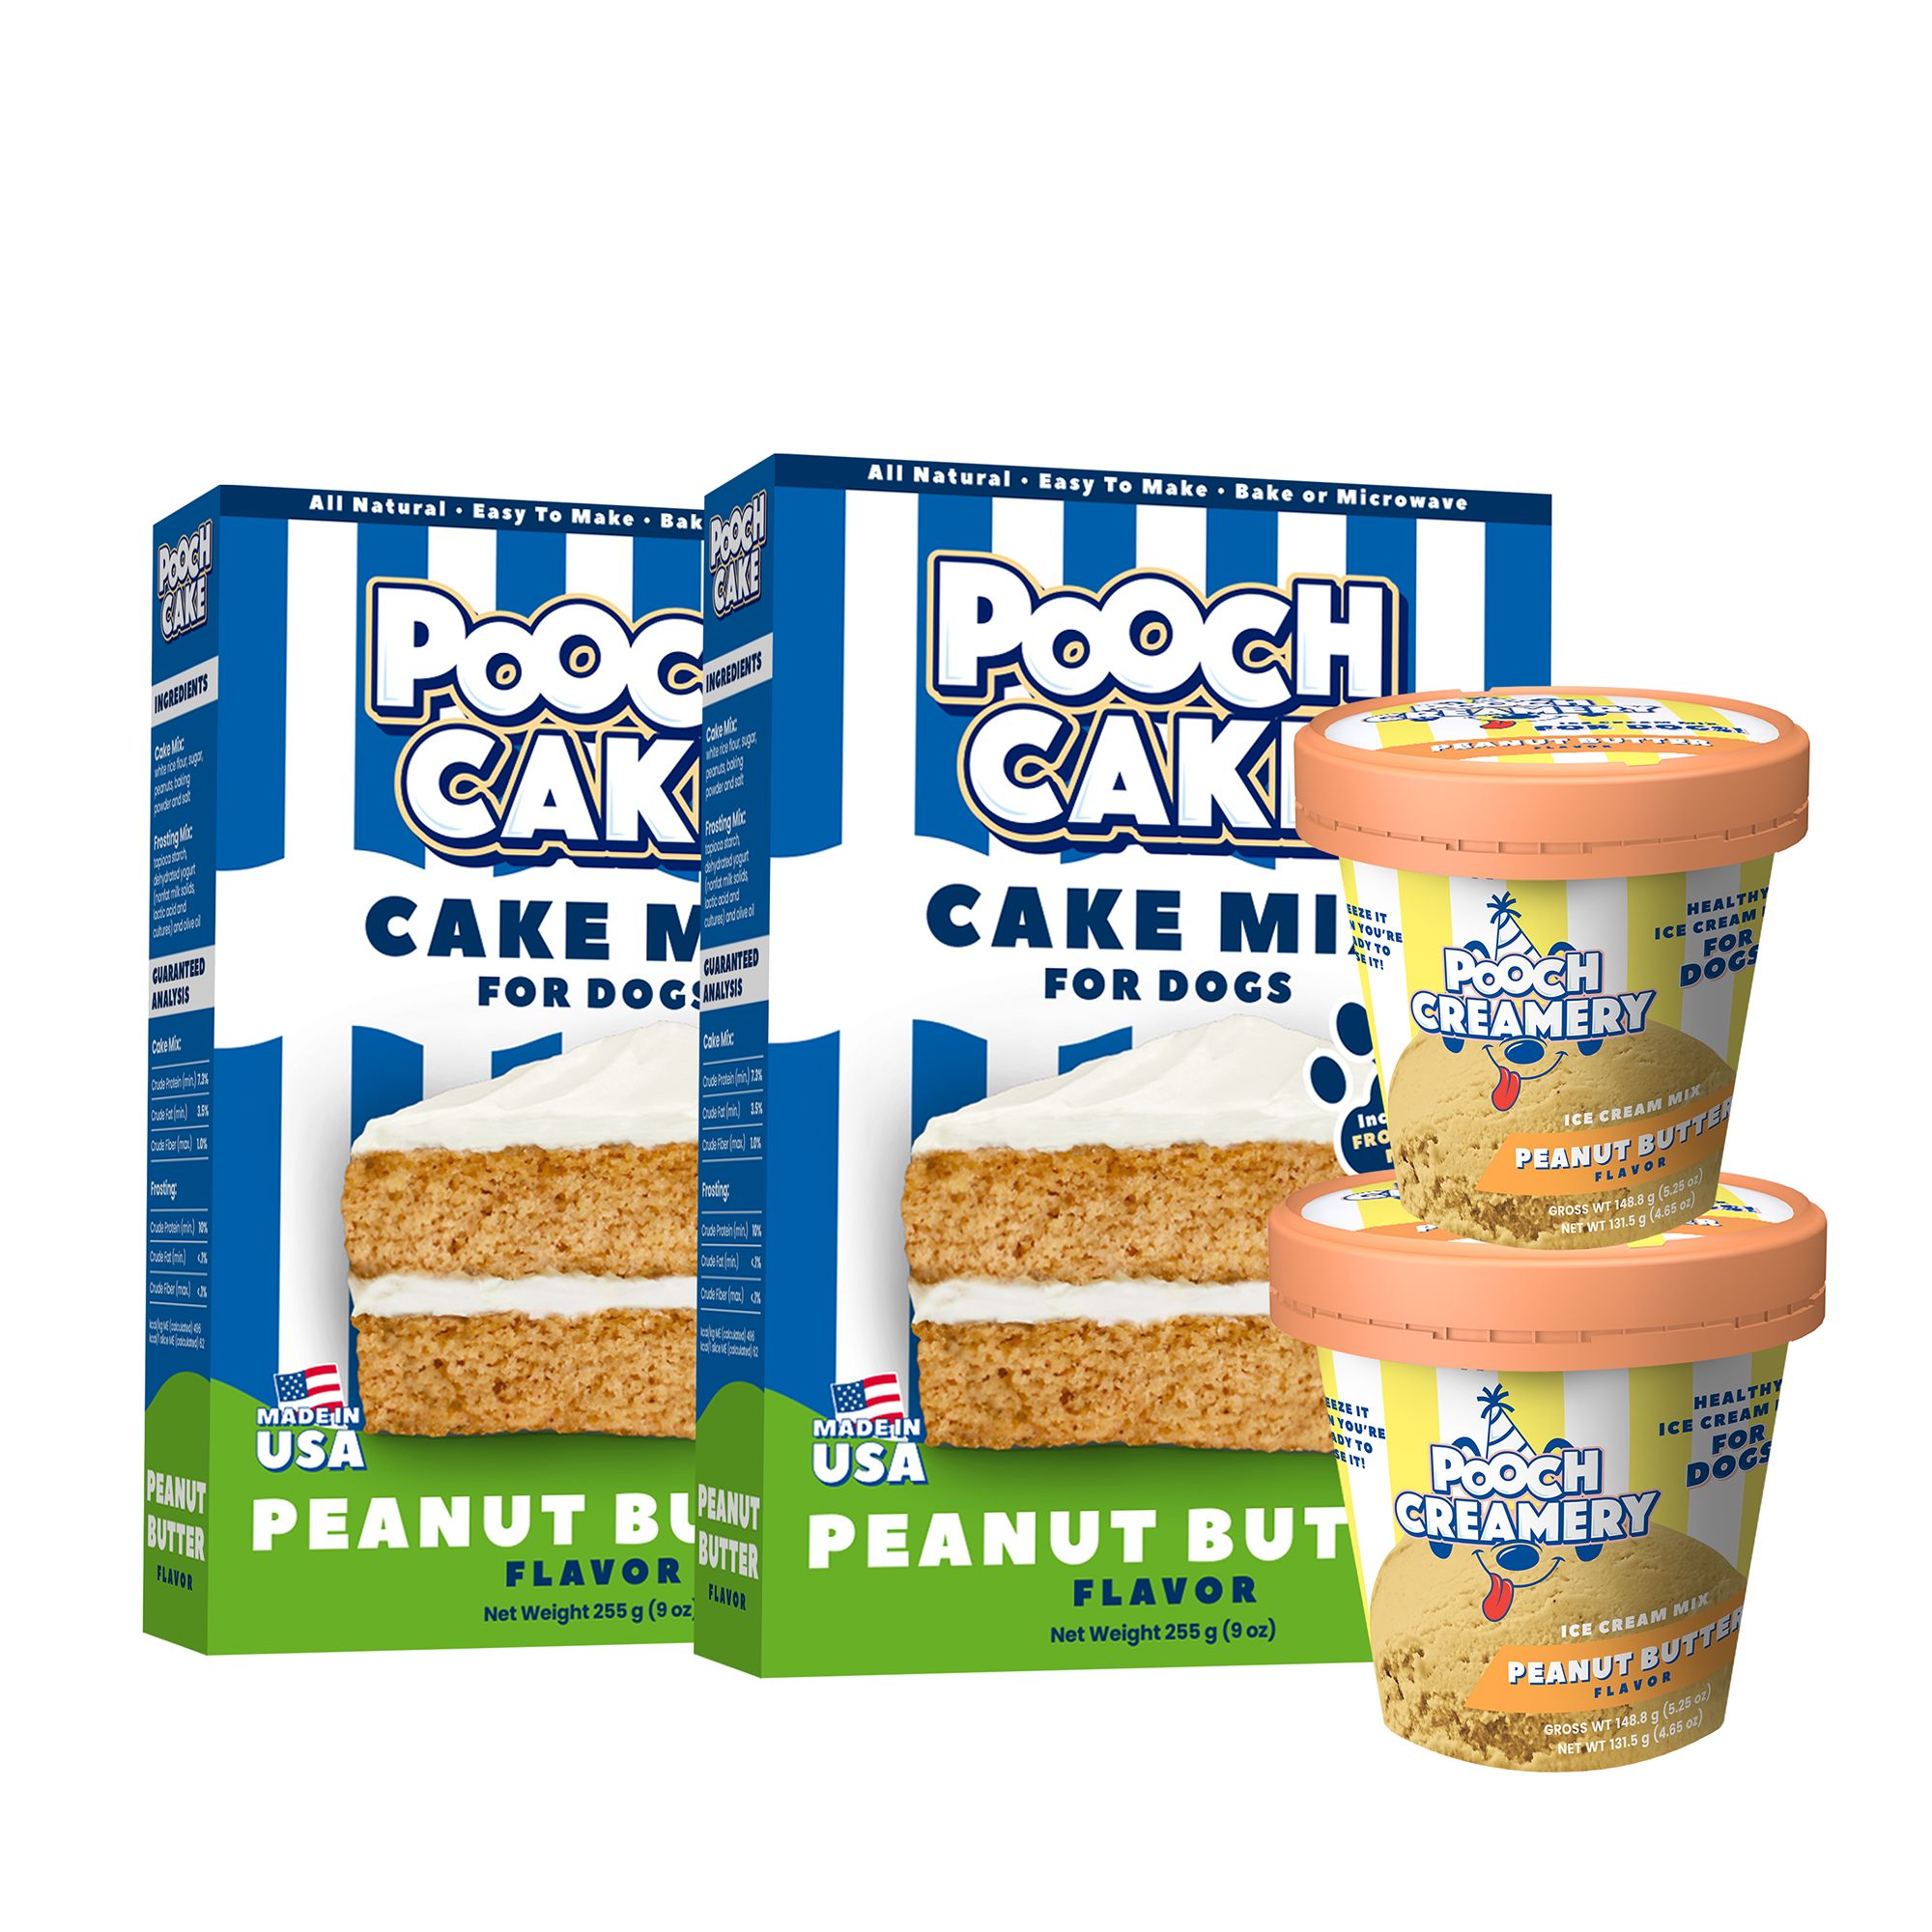 Pooch Cake Mix Ice Cream Dog Treat 2 Pack Dog Biscuits